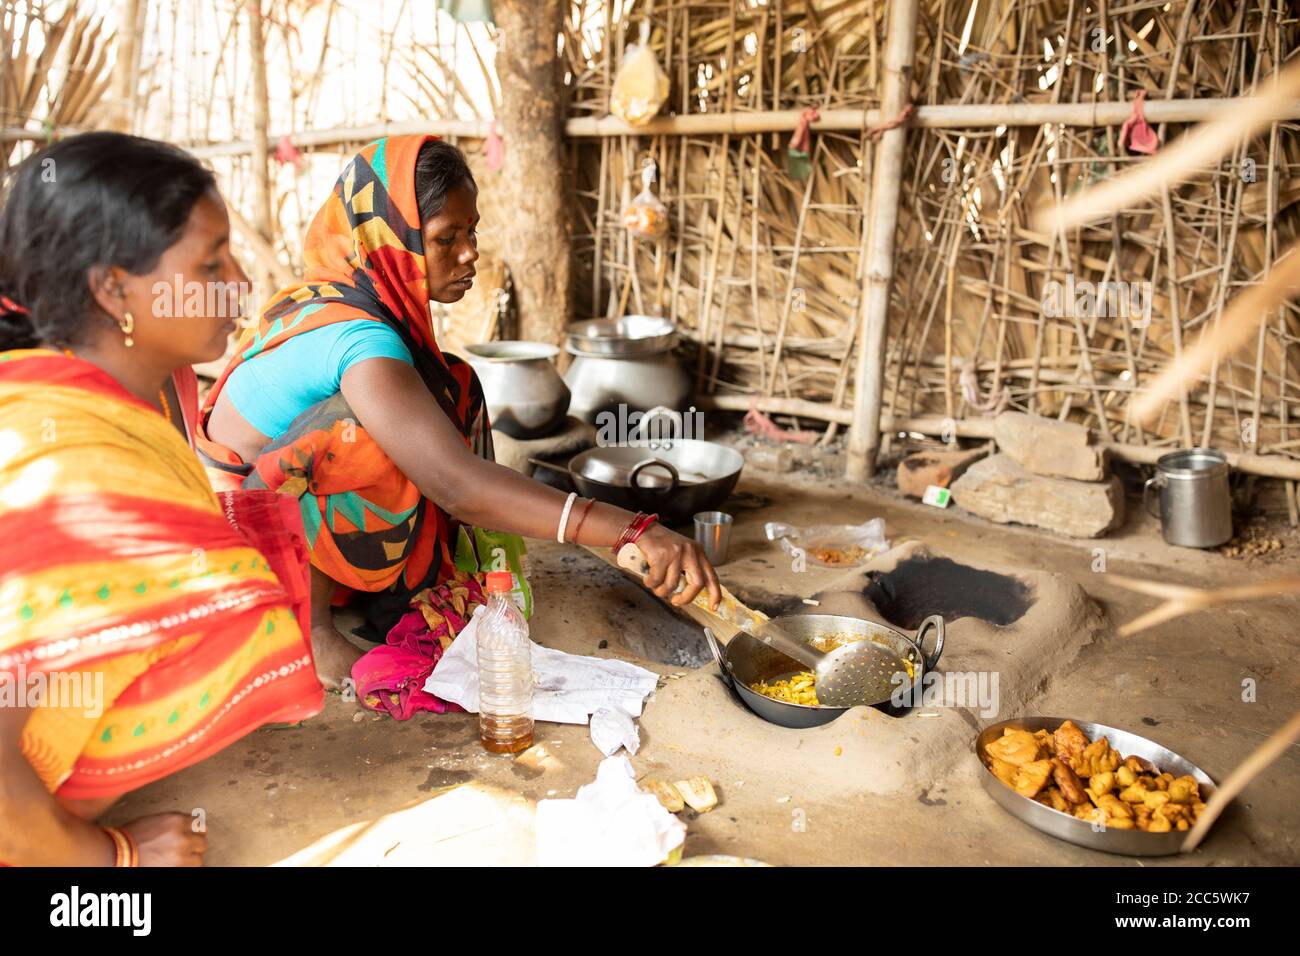 Two women cook a meal together in their village in Bihar, India. Stock Photo